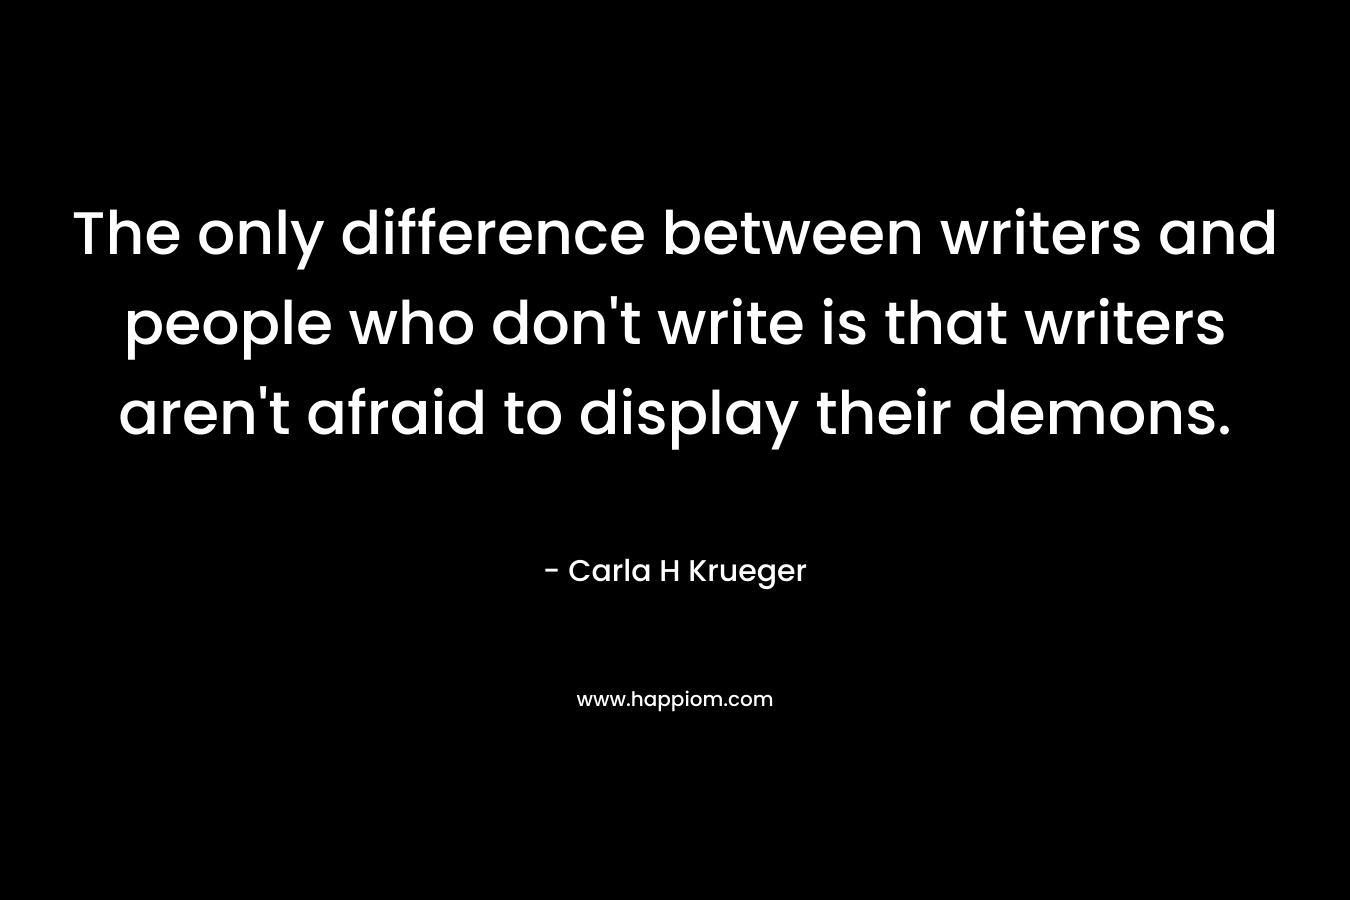 The only difference between writers and people who don’t write is that writers aren’t afraid to display their demons. – Carla H Krueger